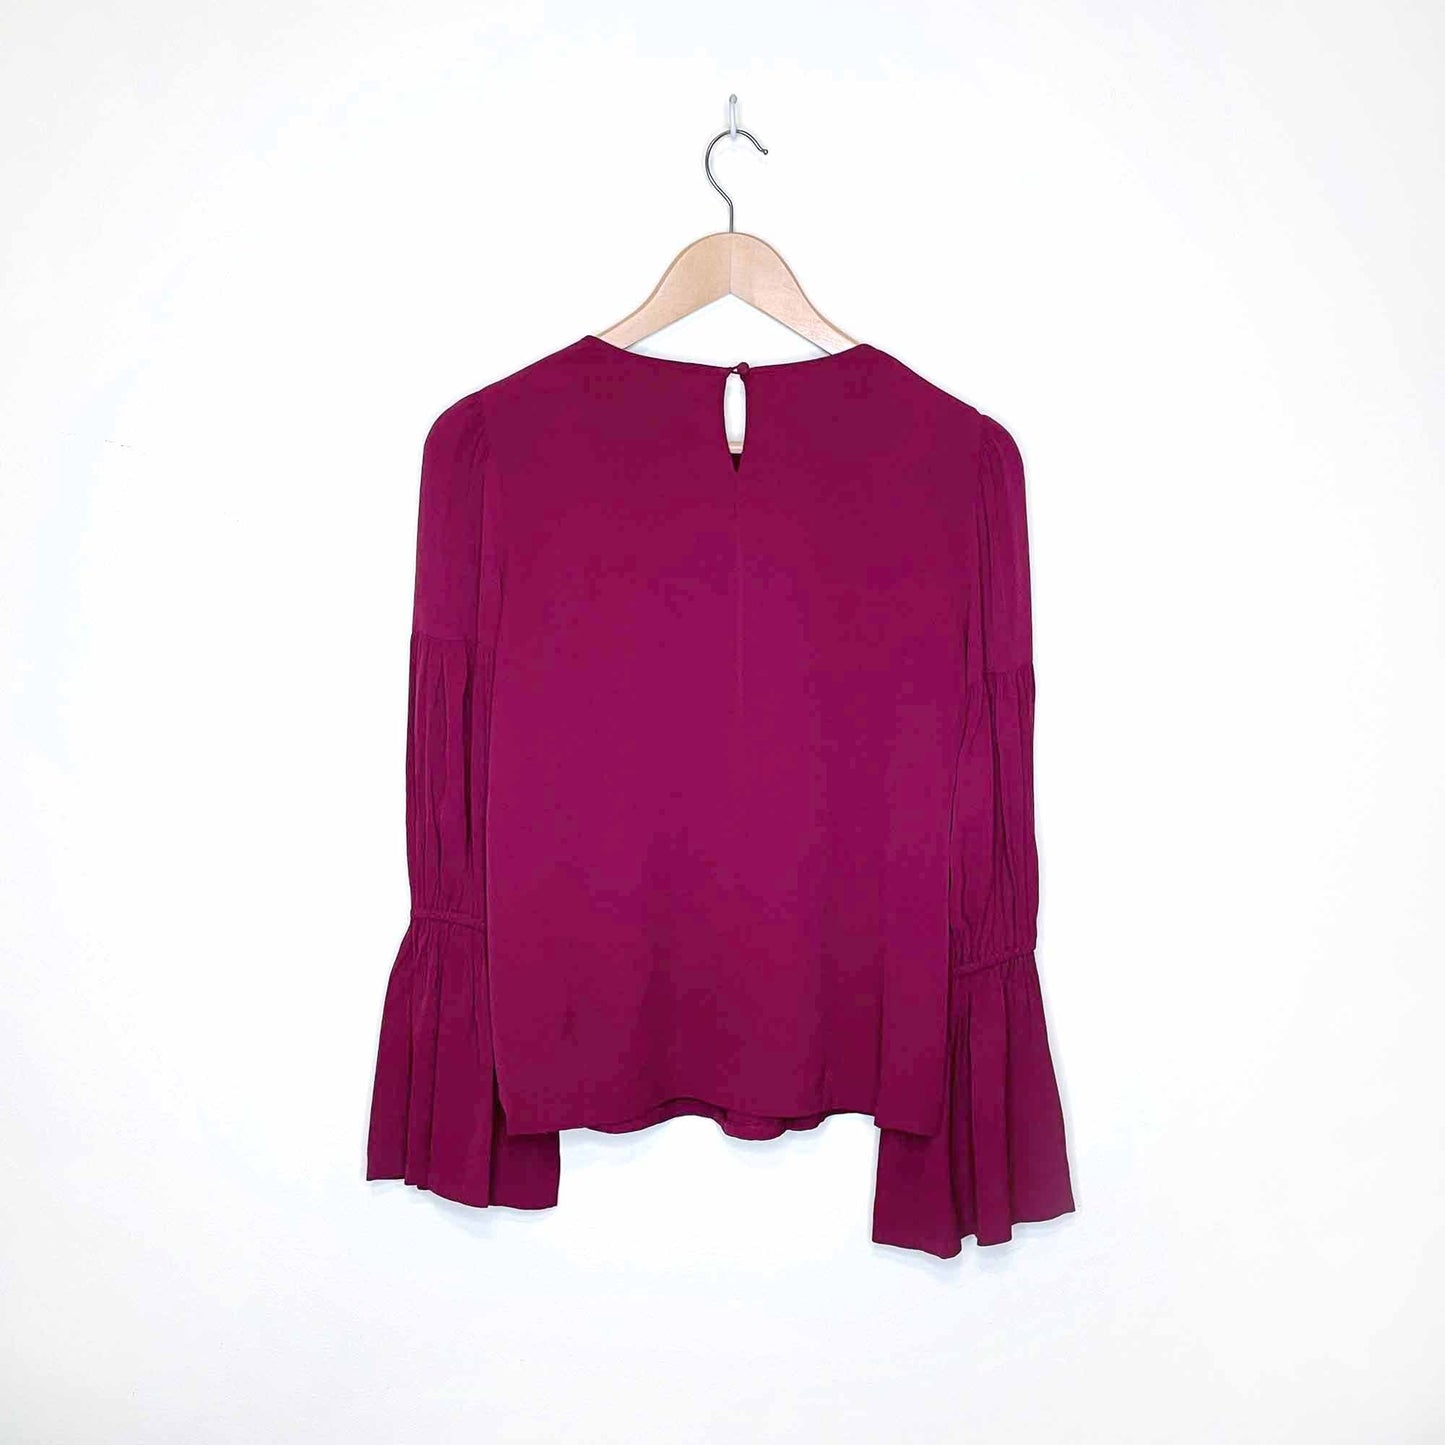 club monaco amund blouse with pleated bell sleeves - size xs